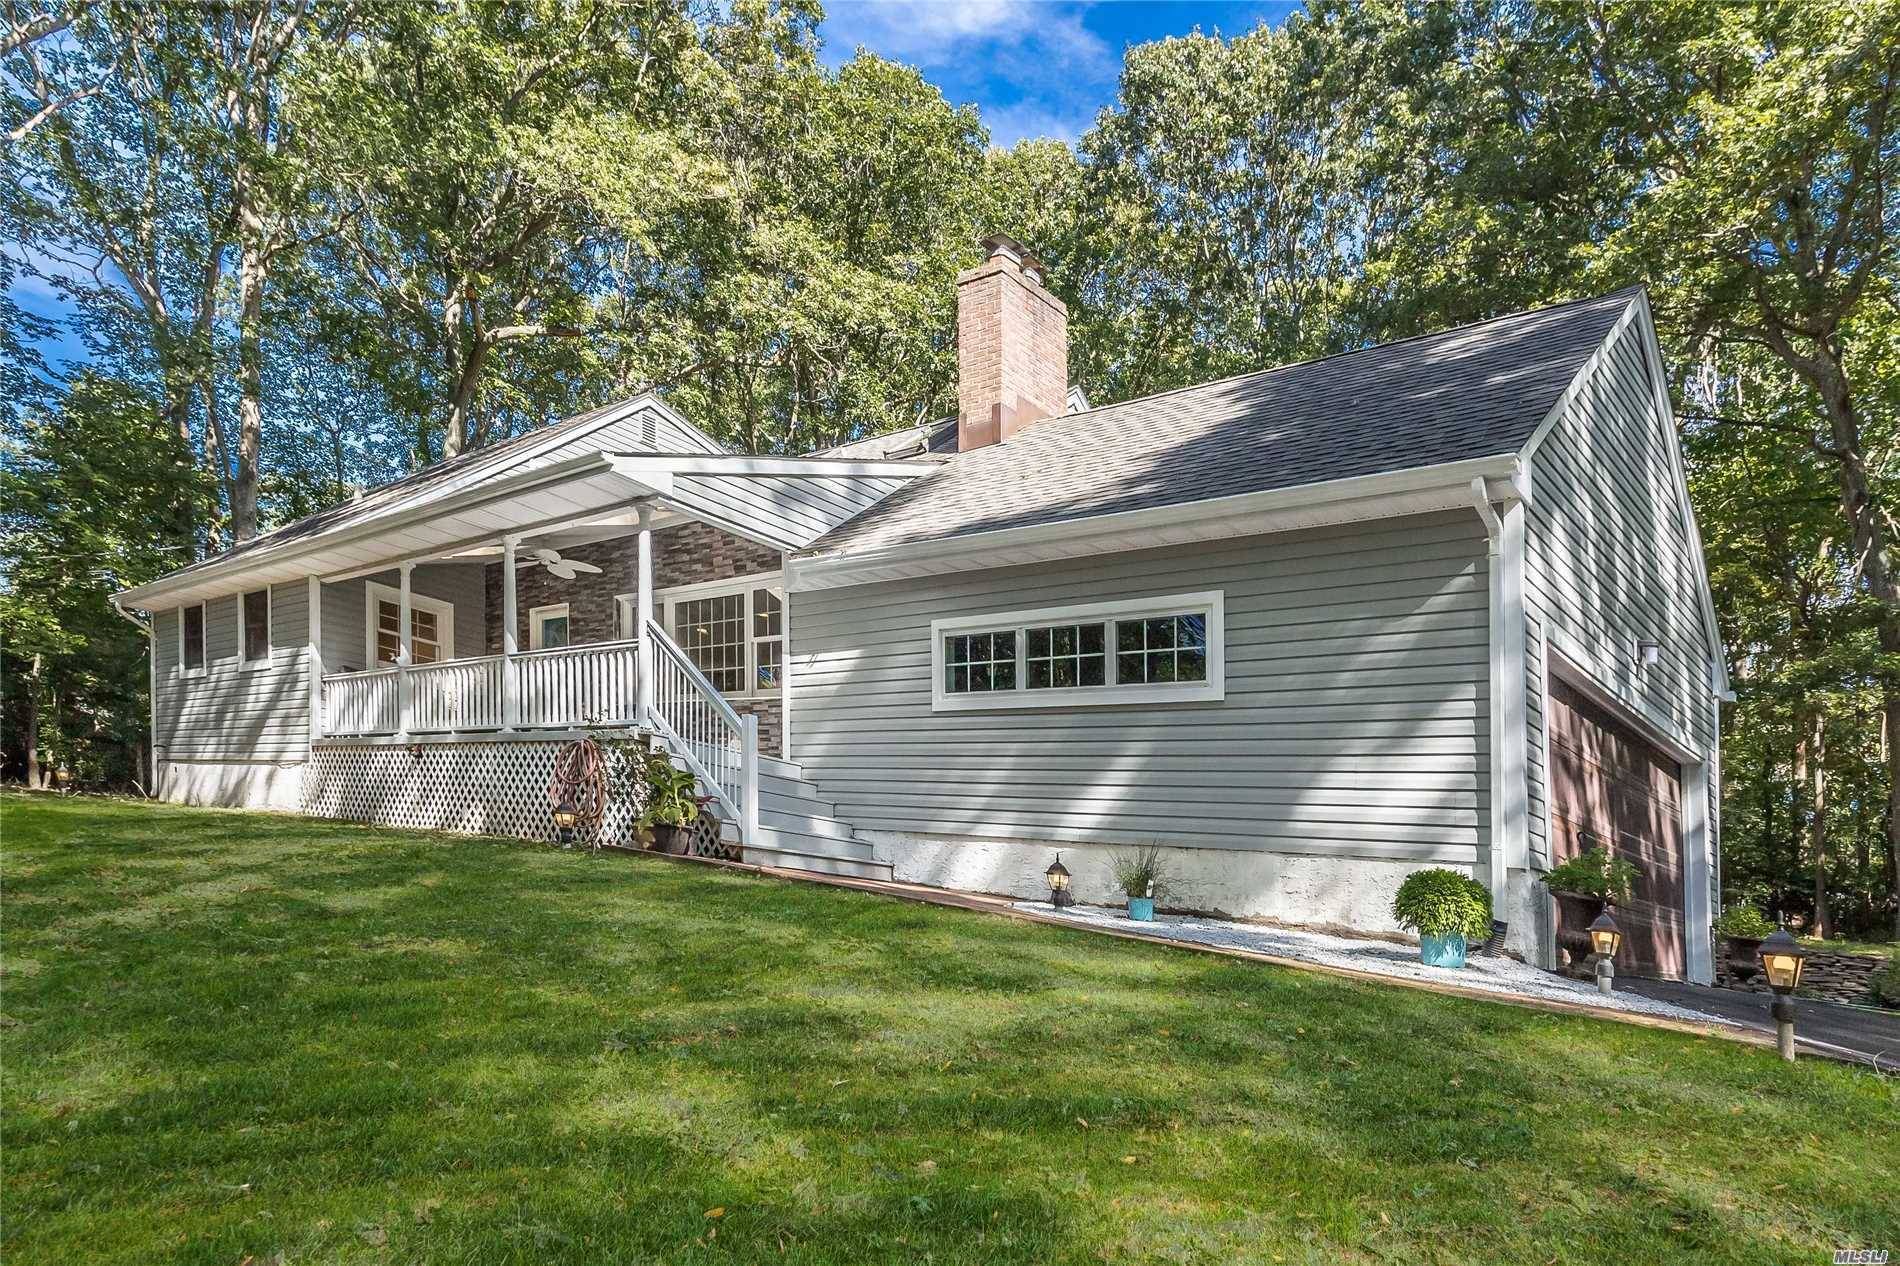 Very Privately Located In Old Chester Hills Section Of Huntington, Elwood School District Of 2018 National Blue Ribbon Recipient,, Newly Renovated In And Out, New Kitchen, New Ss Appliances, Quartz ...